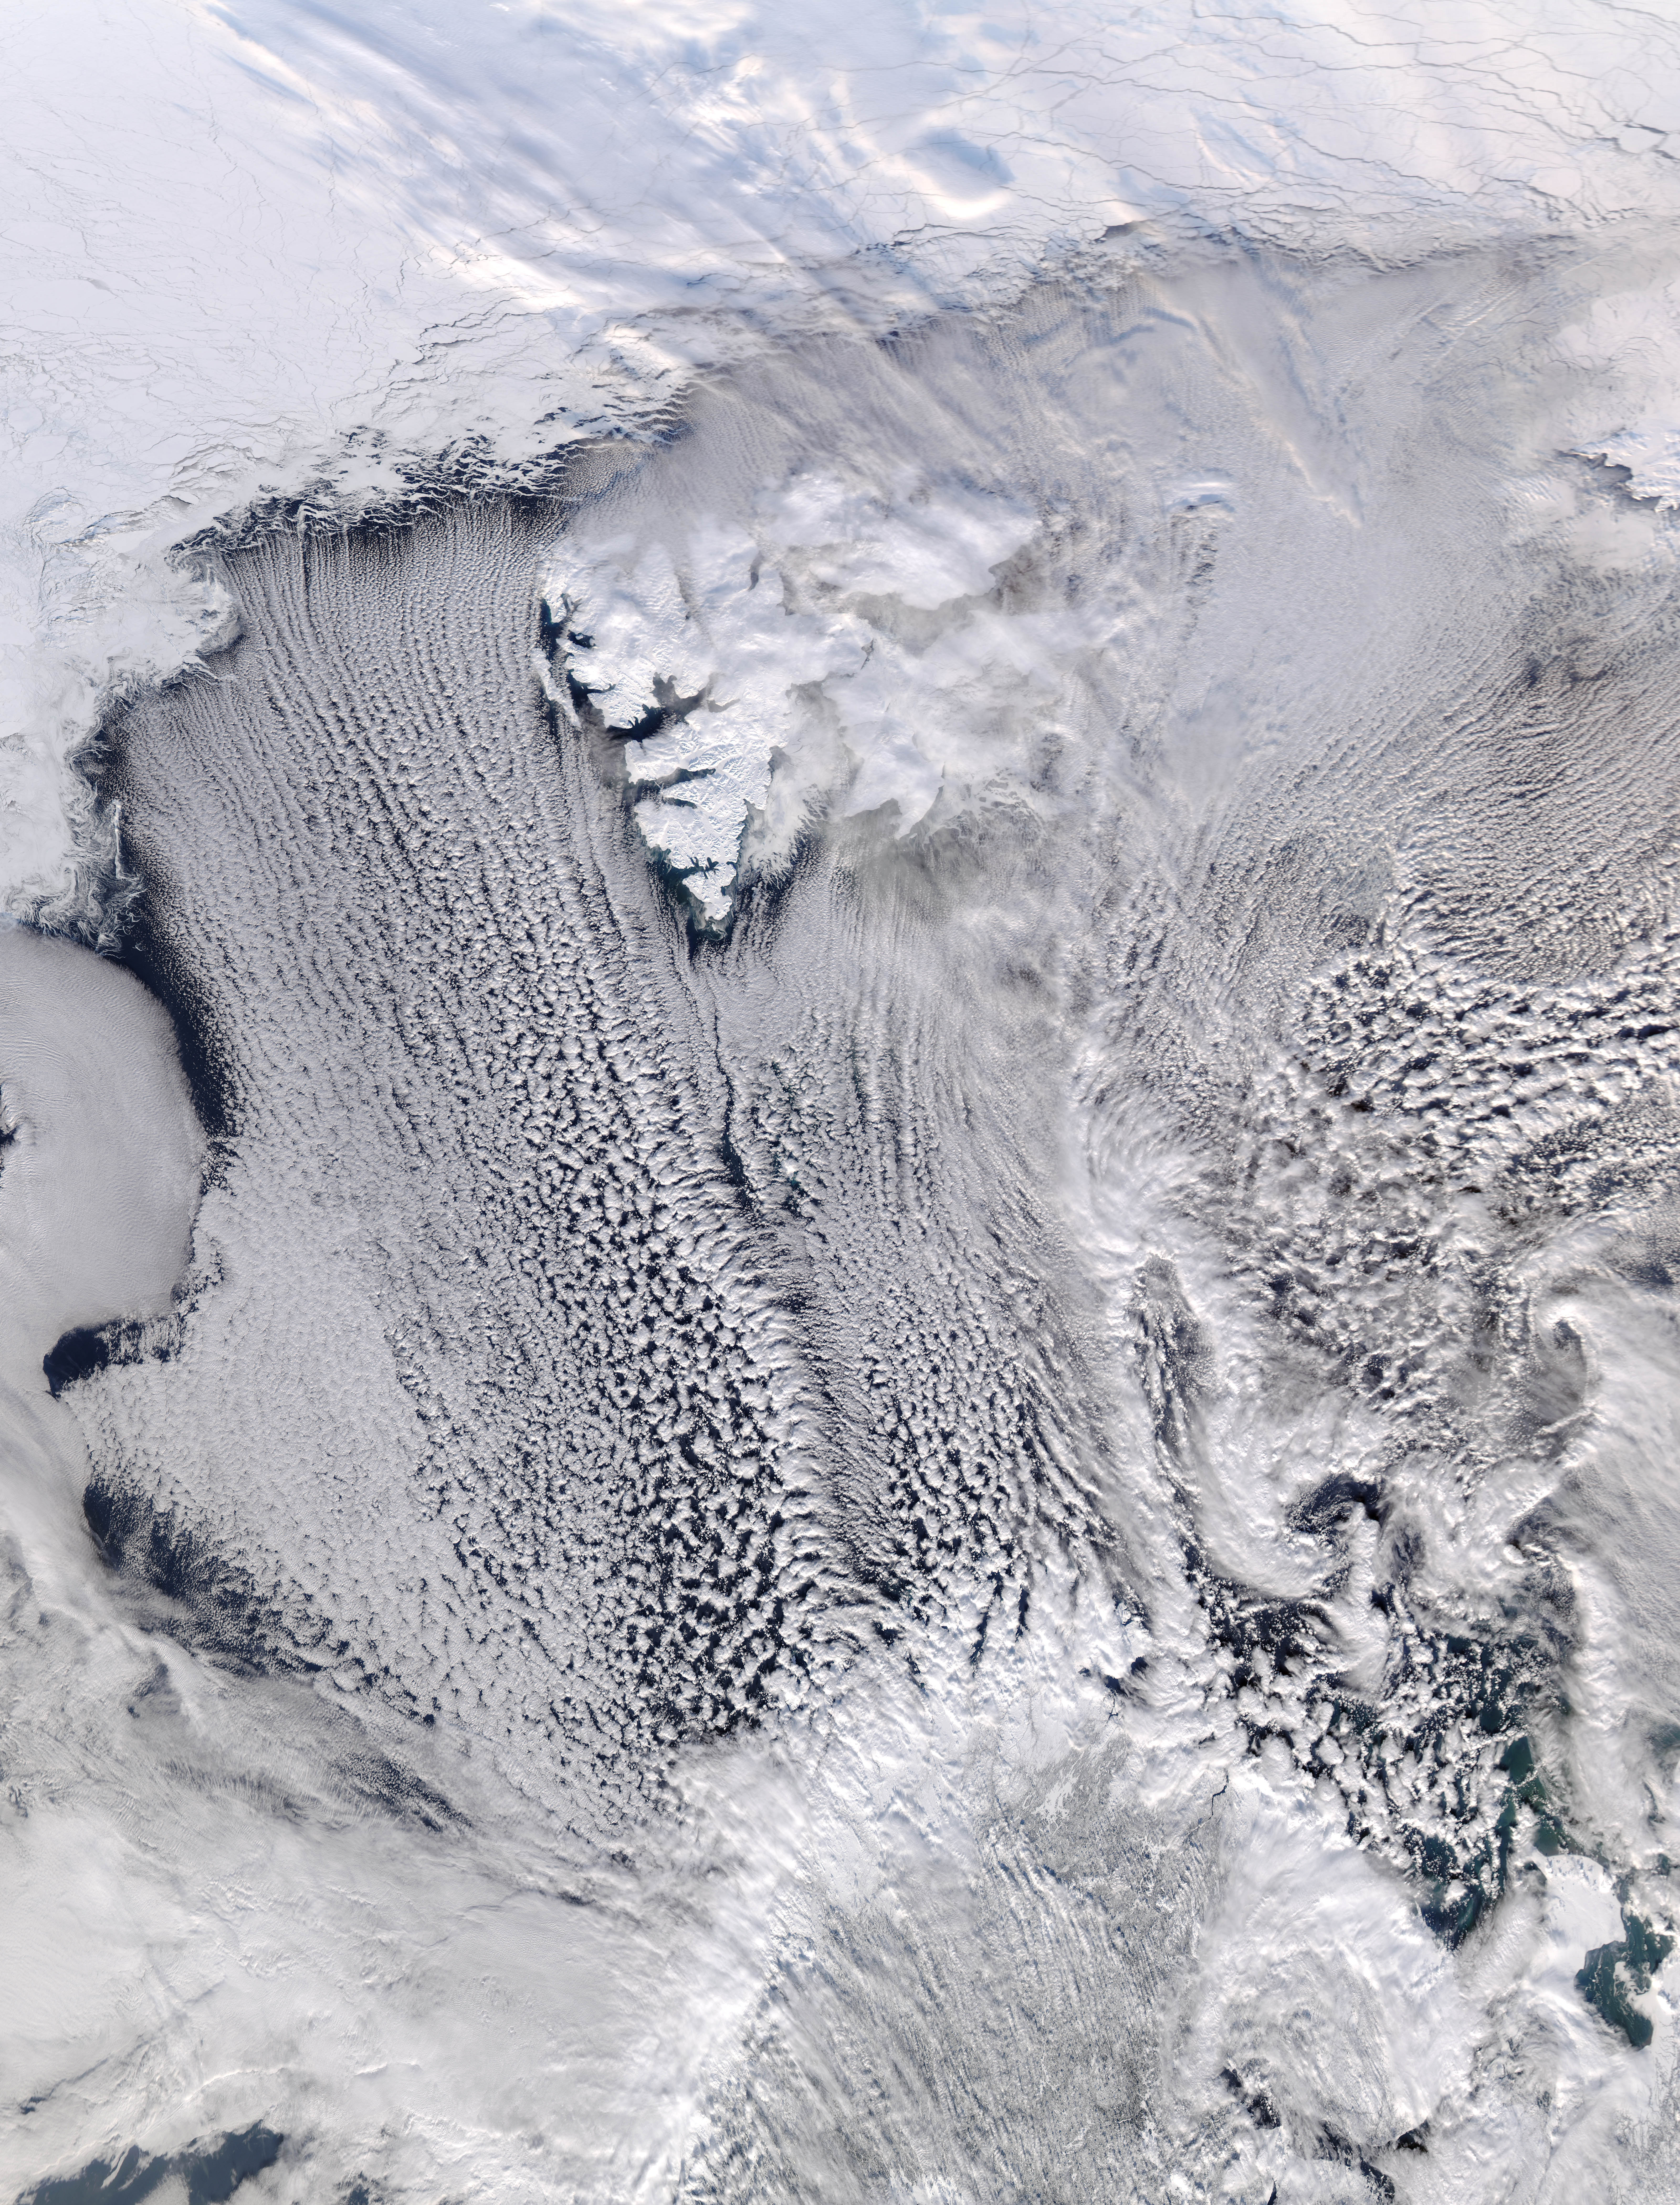 Clouds Streets and Comma Clouds Near Svalbard - related image preview